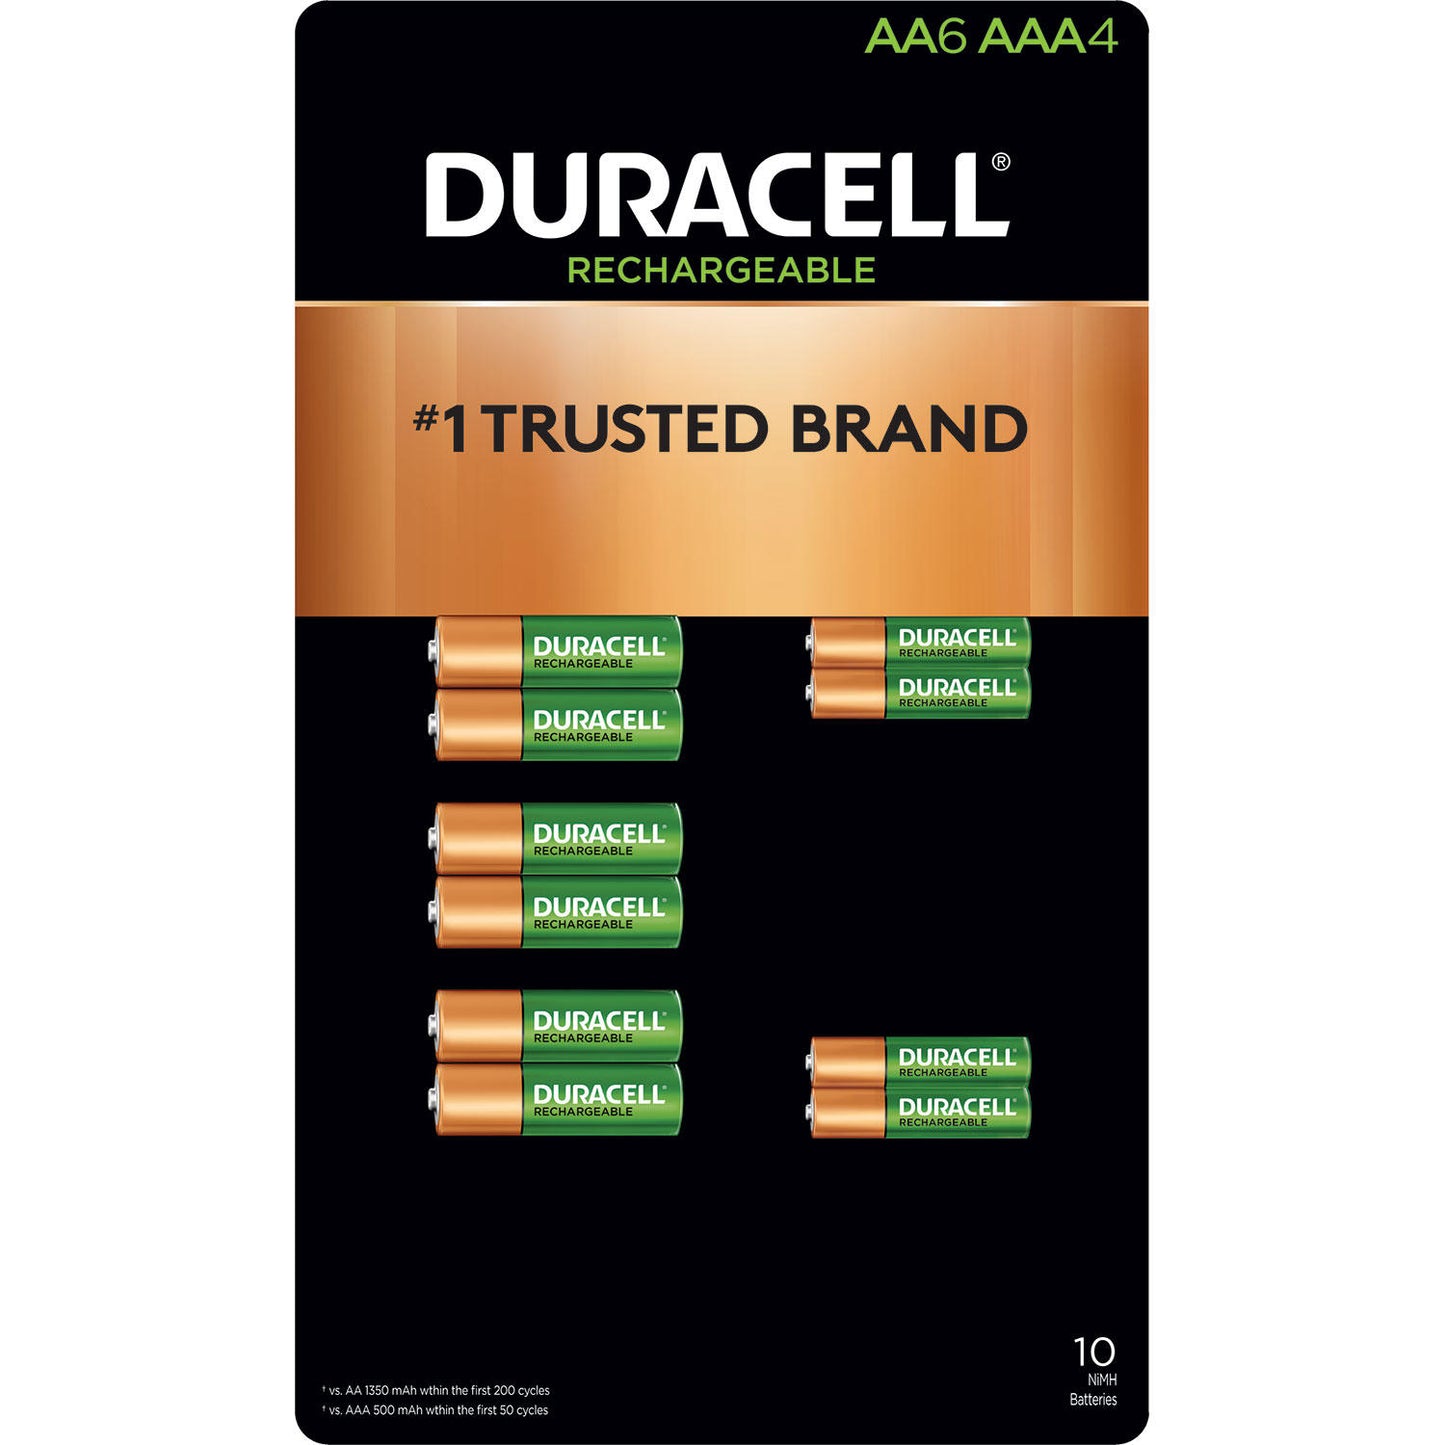 Duracell Rechargeable NiMH AA and AAA Batteries w/ ion Core